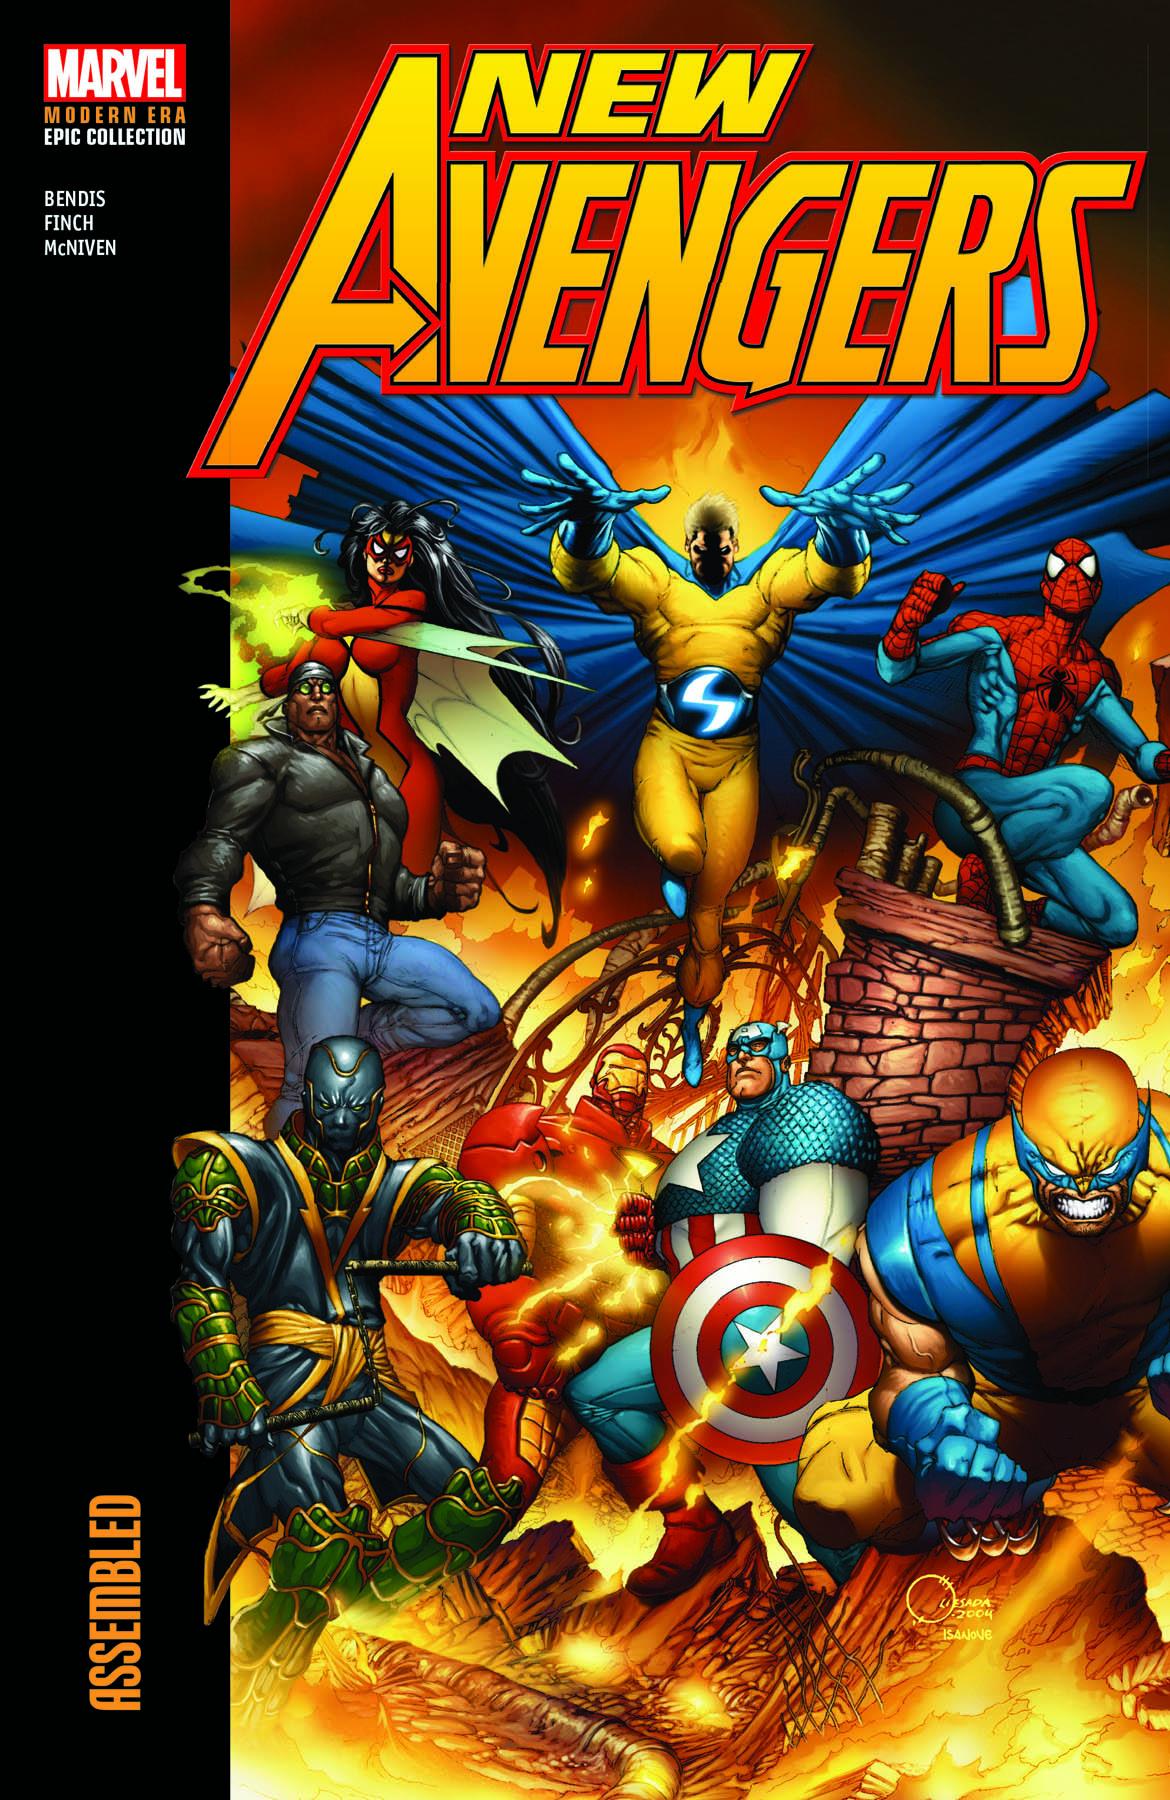 New Avengers Modern Era Epic Collection: Assembled (Trade Paperback)